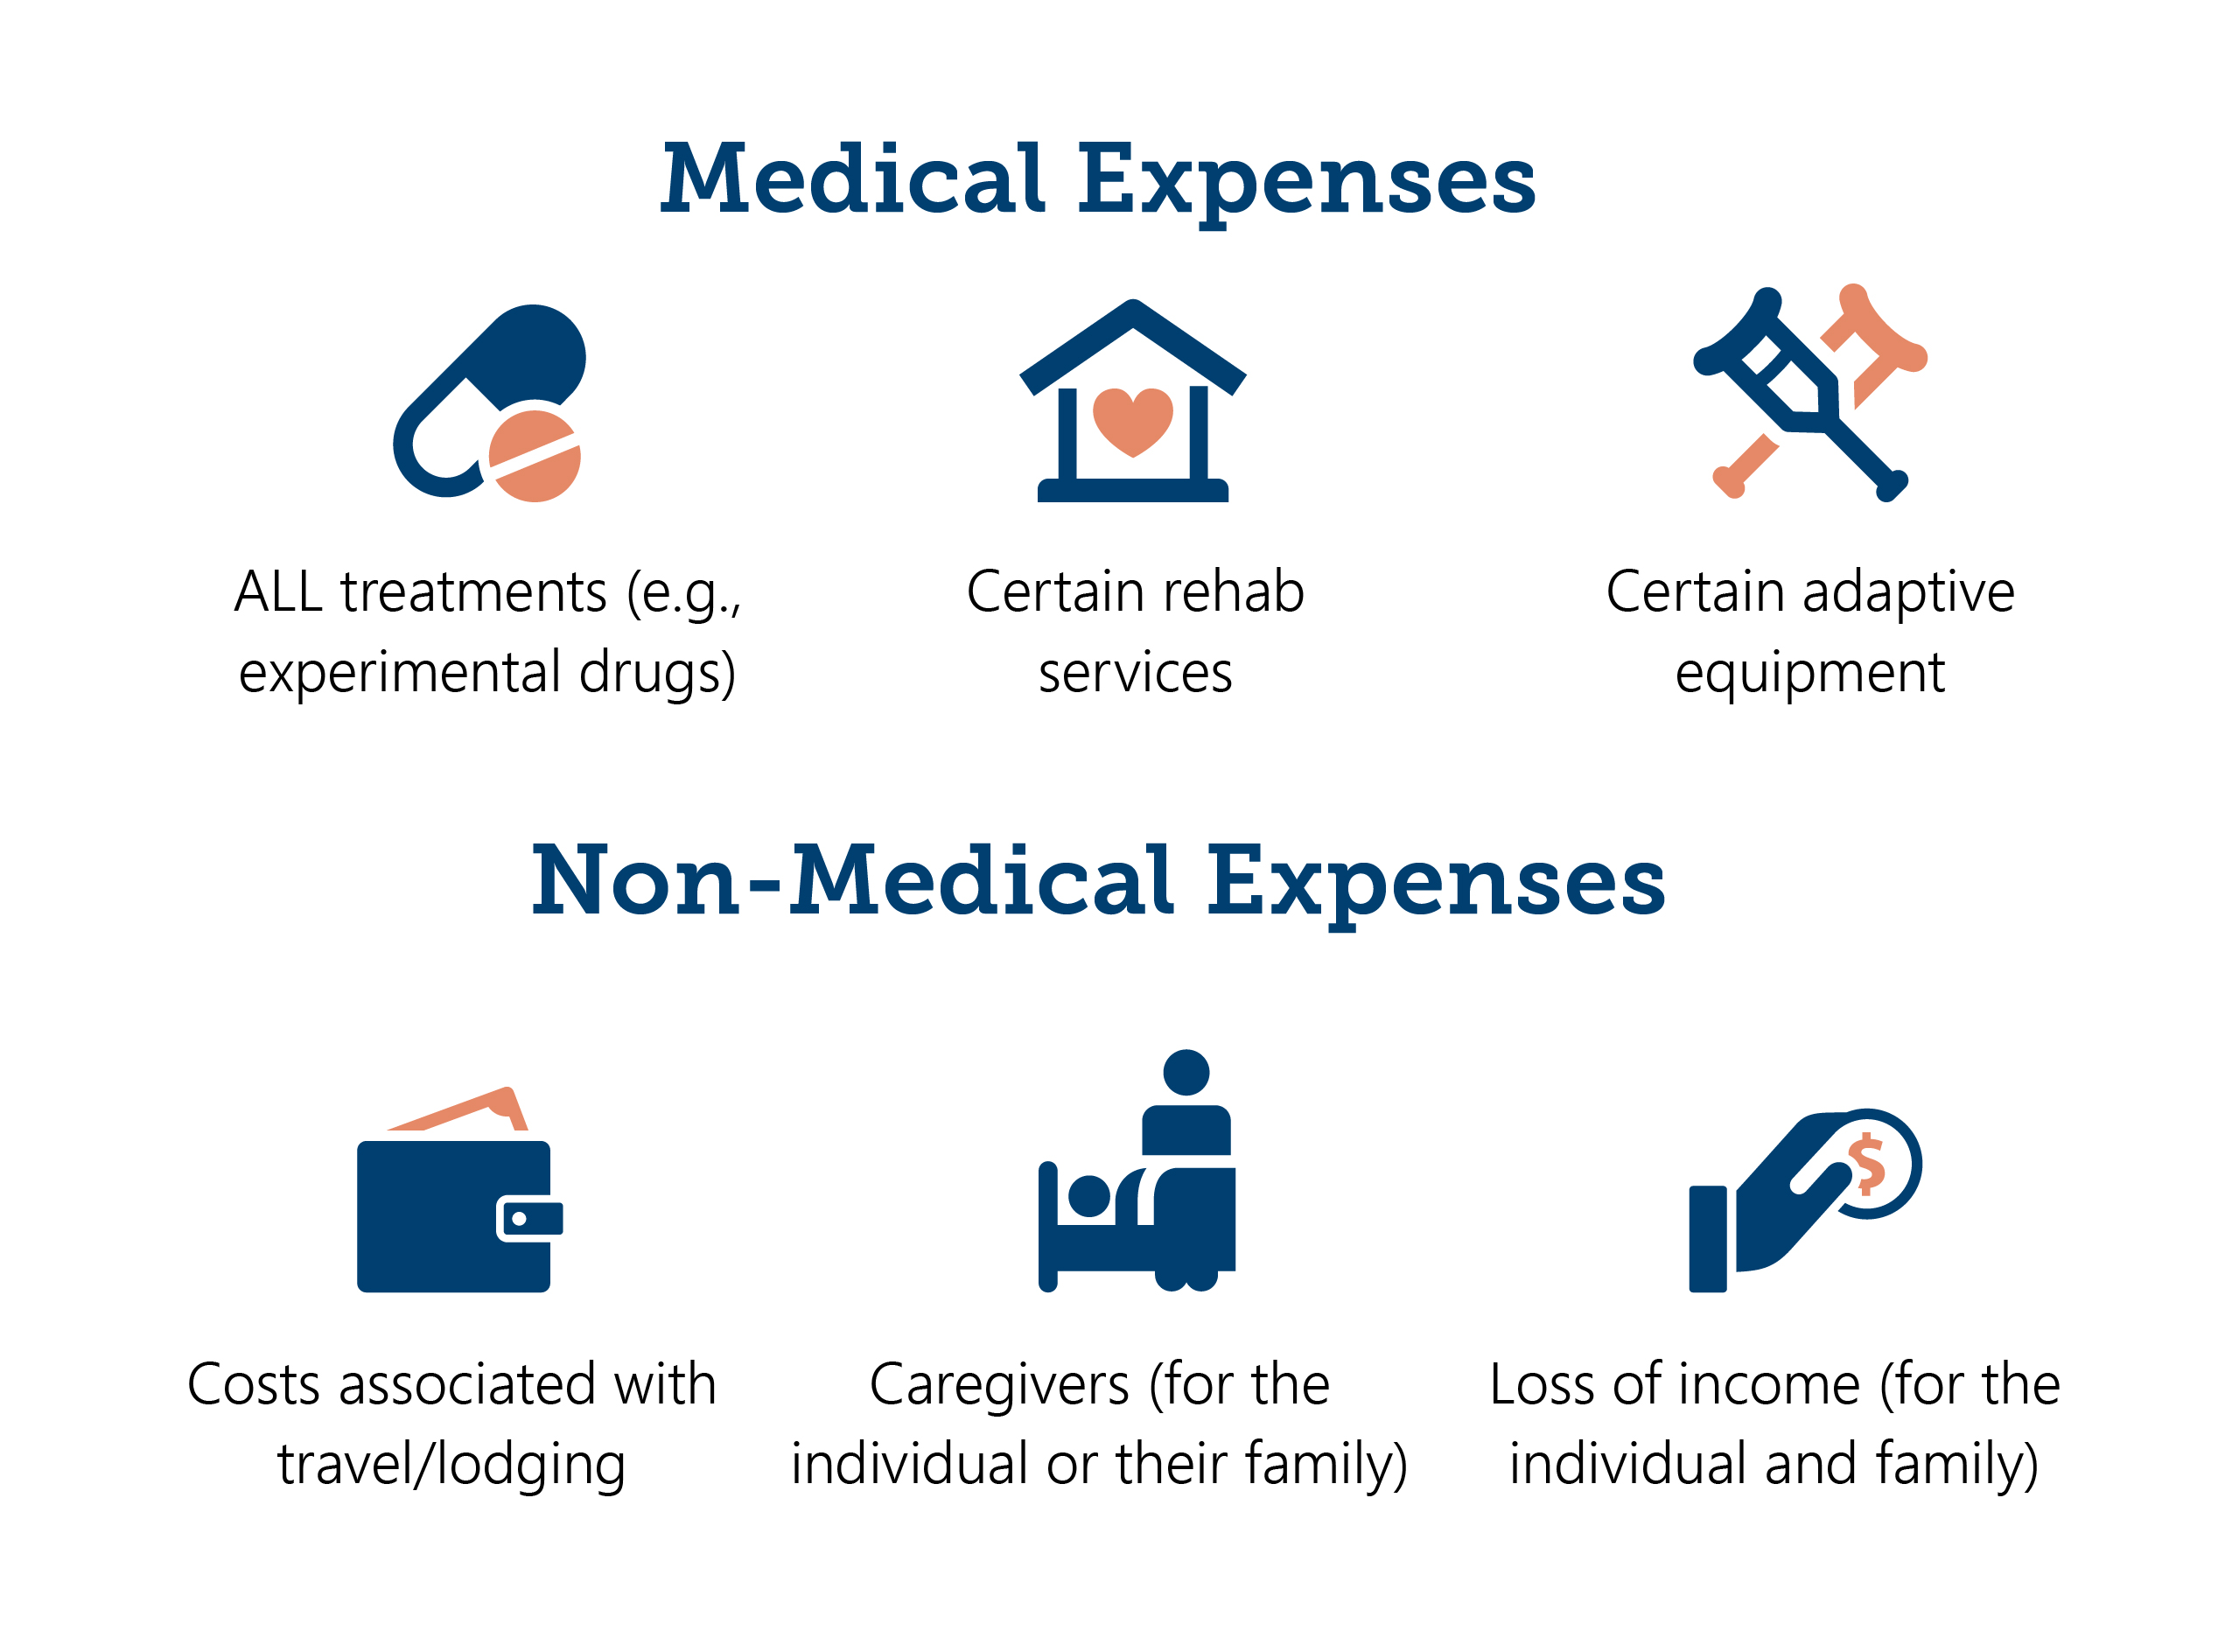 Medical and Non-Medical Expenses Related to Cancer, Heart Attack or Stroke